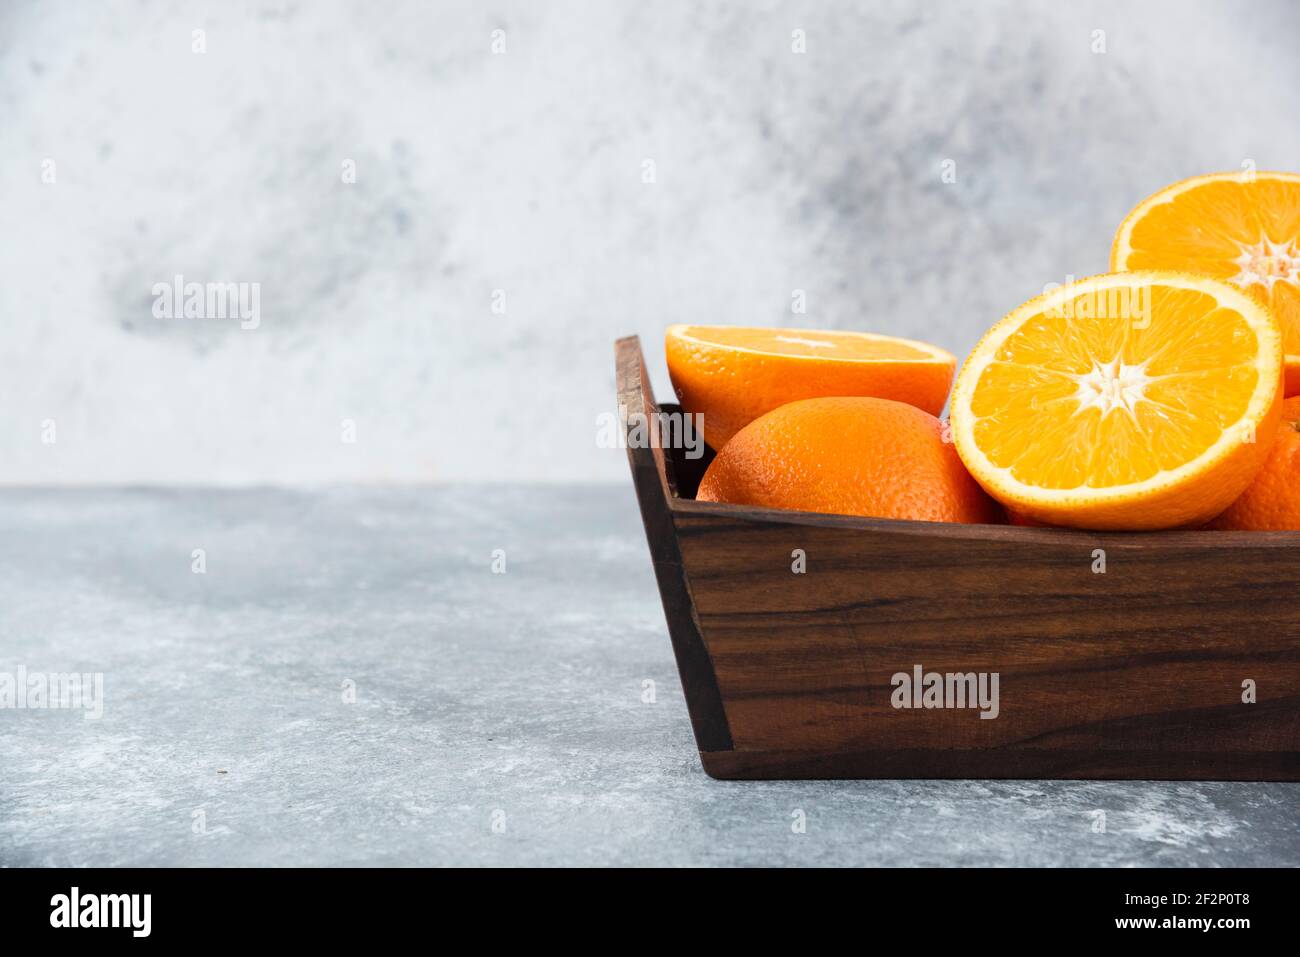 A wooden old box full of sliced and whole juicy orange fruits Stock Photo